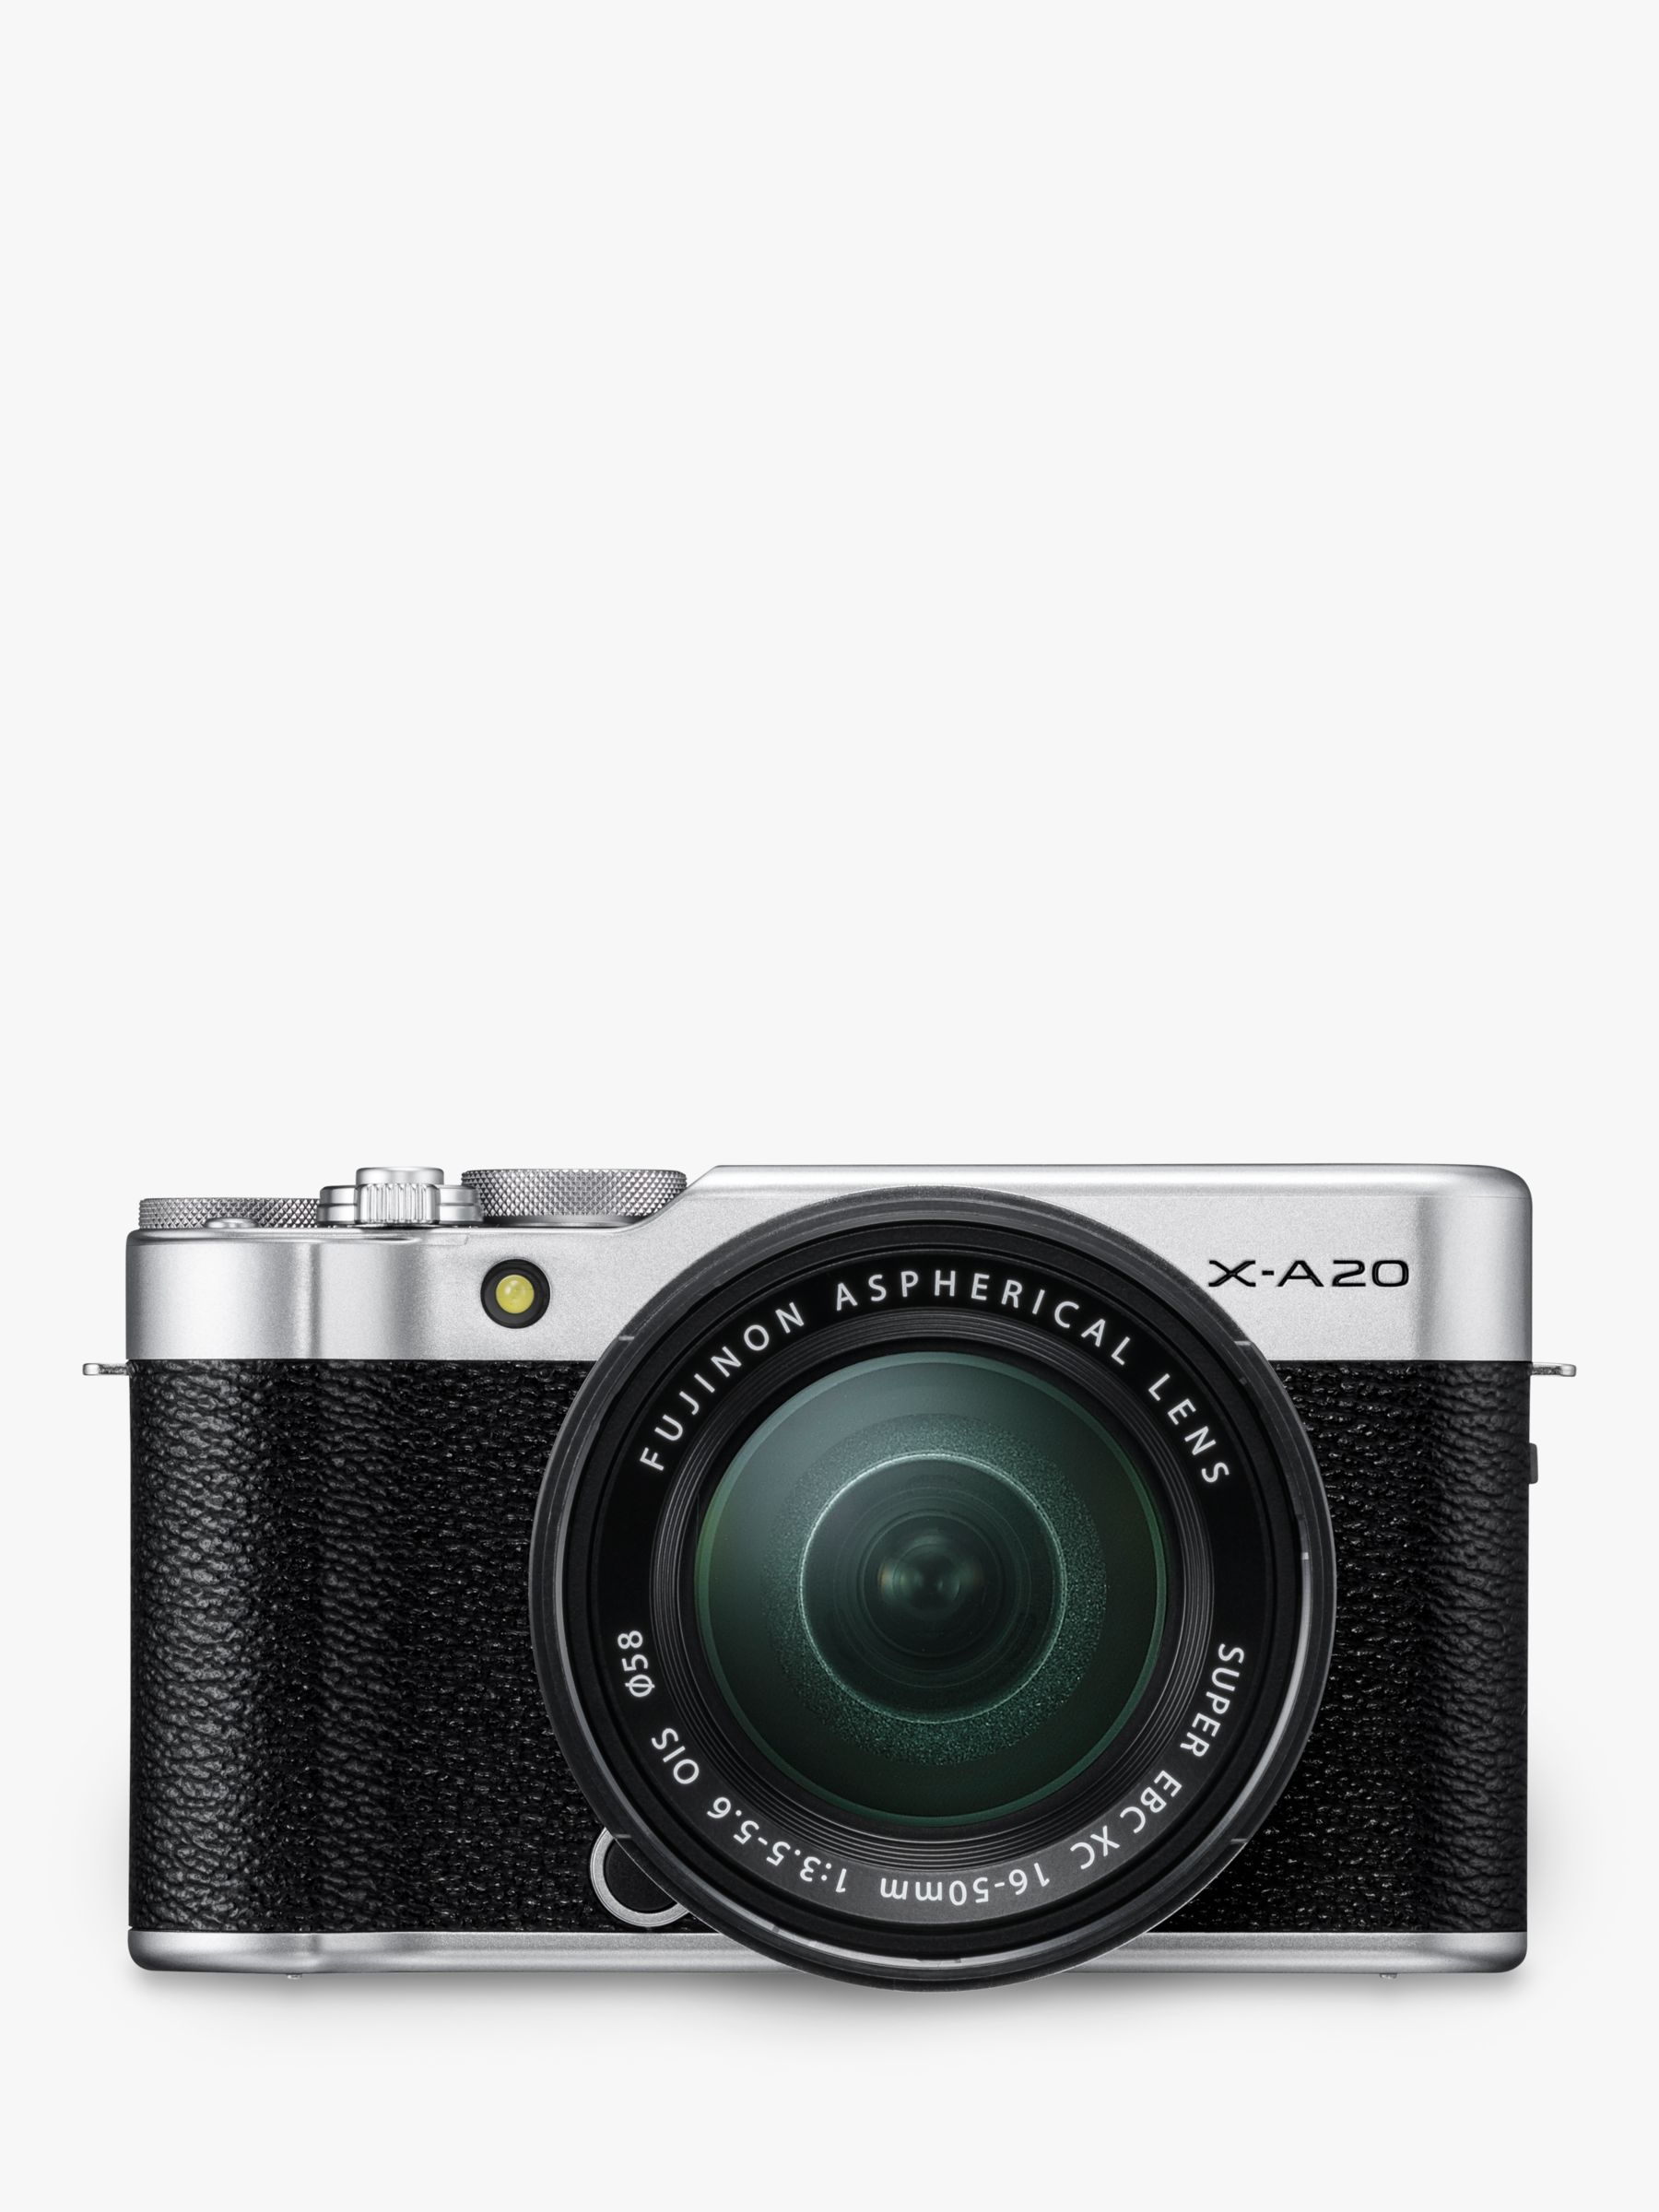 Fujifilm X-A20 Compact System Camera with XC 15-45mm OIS Lens, HD 1080p, 16.3MP, Wi-Fi, 3” Tiltable LCD Touch Screen, Black & Silver